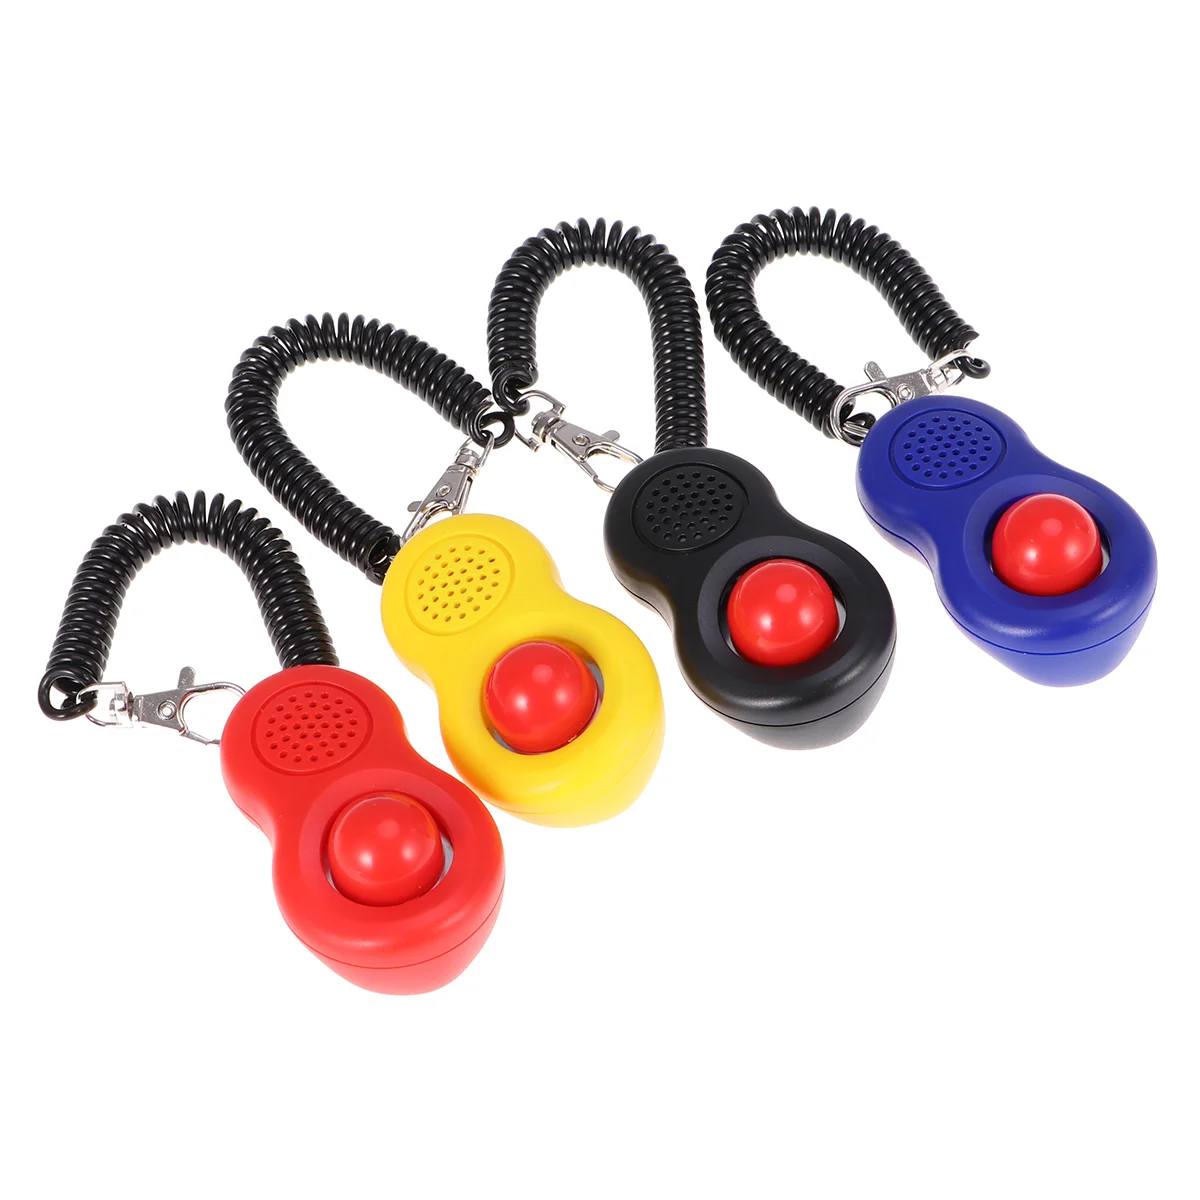 

Training Clicker Dog Pet Cat Clickers Buttons Strap Wrist Dogs Puppy Aids Big Button Behavior Tool Band Cats Set Trainer Stuff